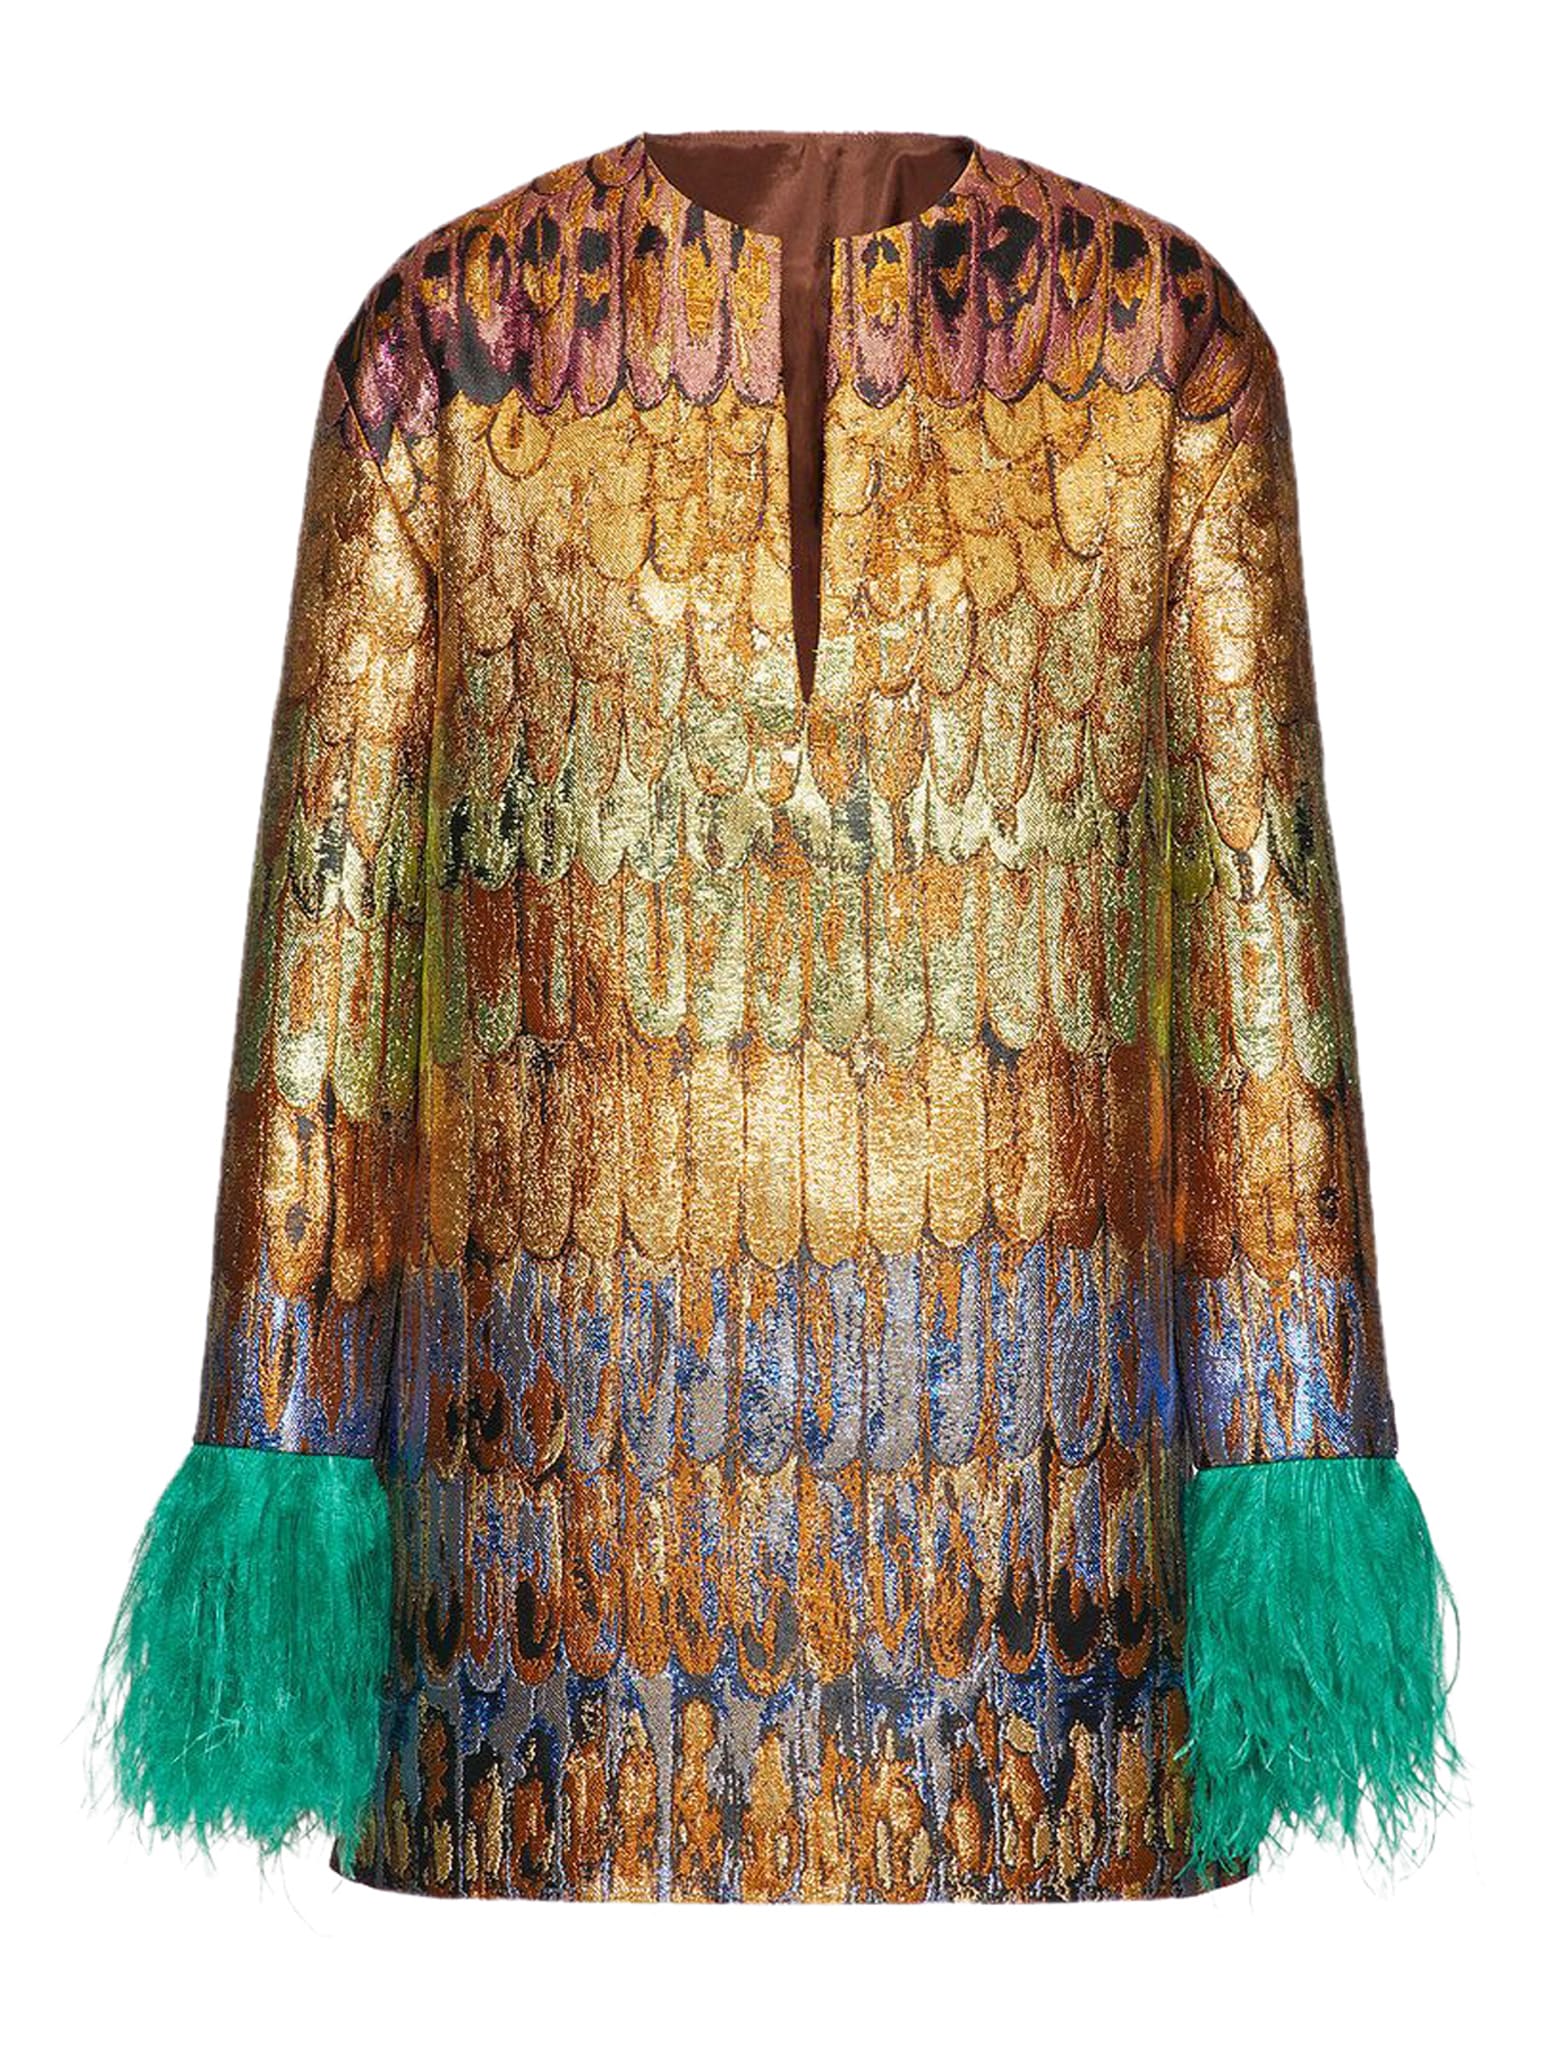 VALENTINO DRESS - WITH FEATHERS